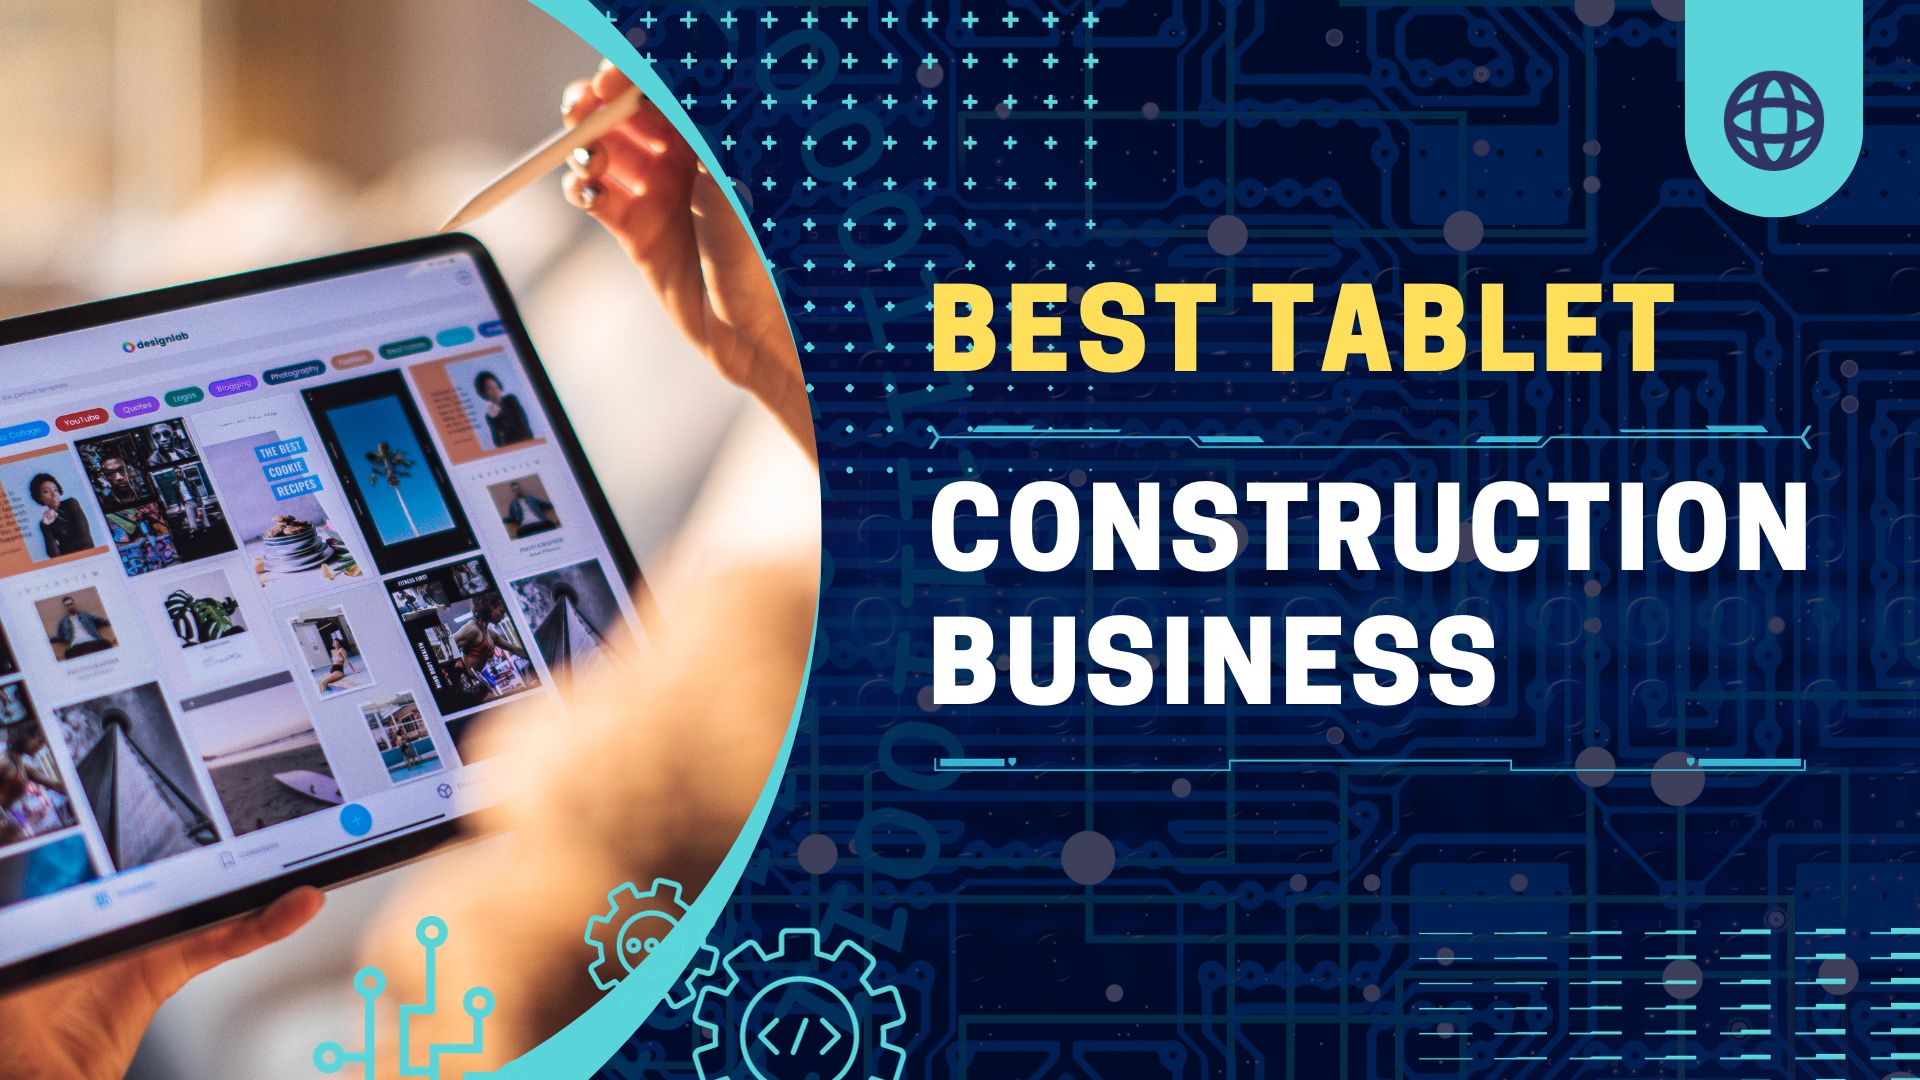 Best Tablet for Construction Business